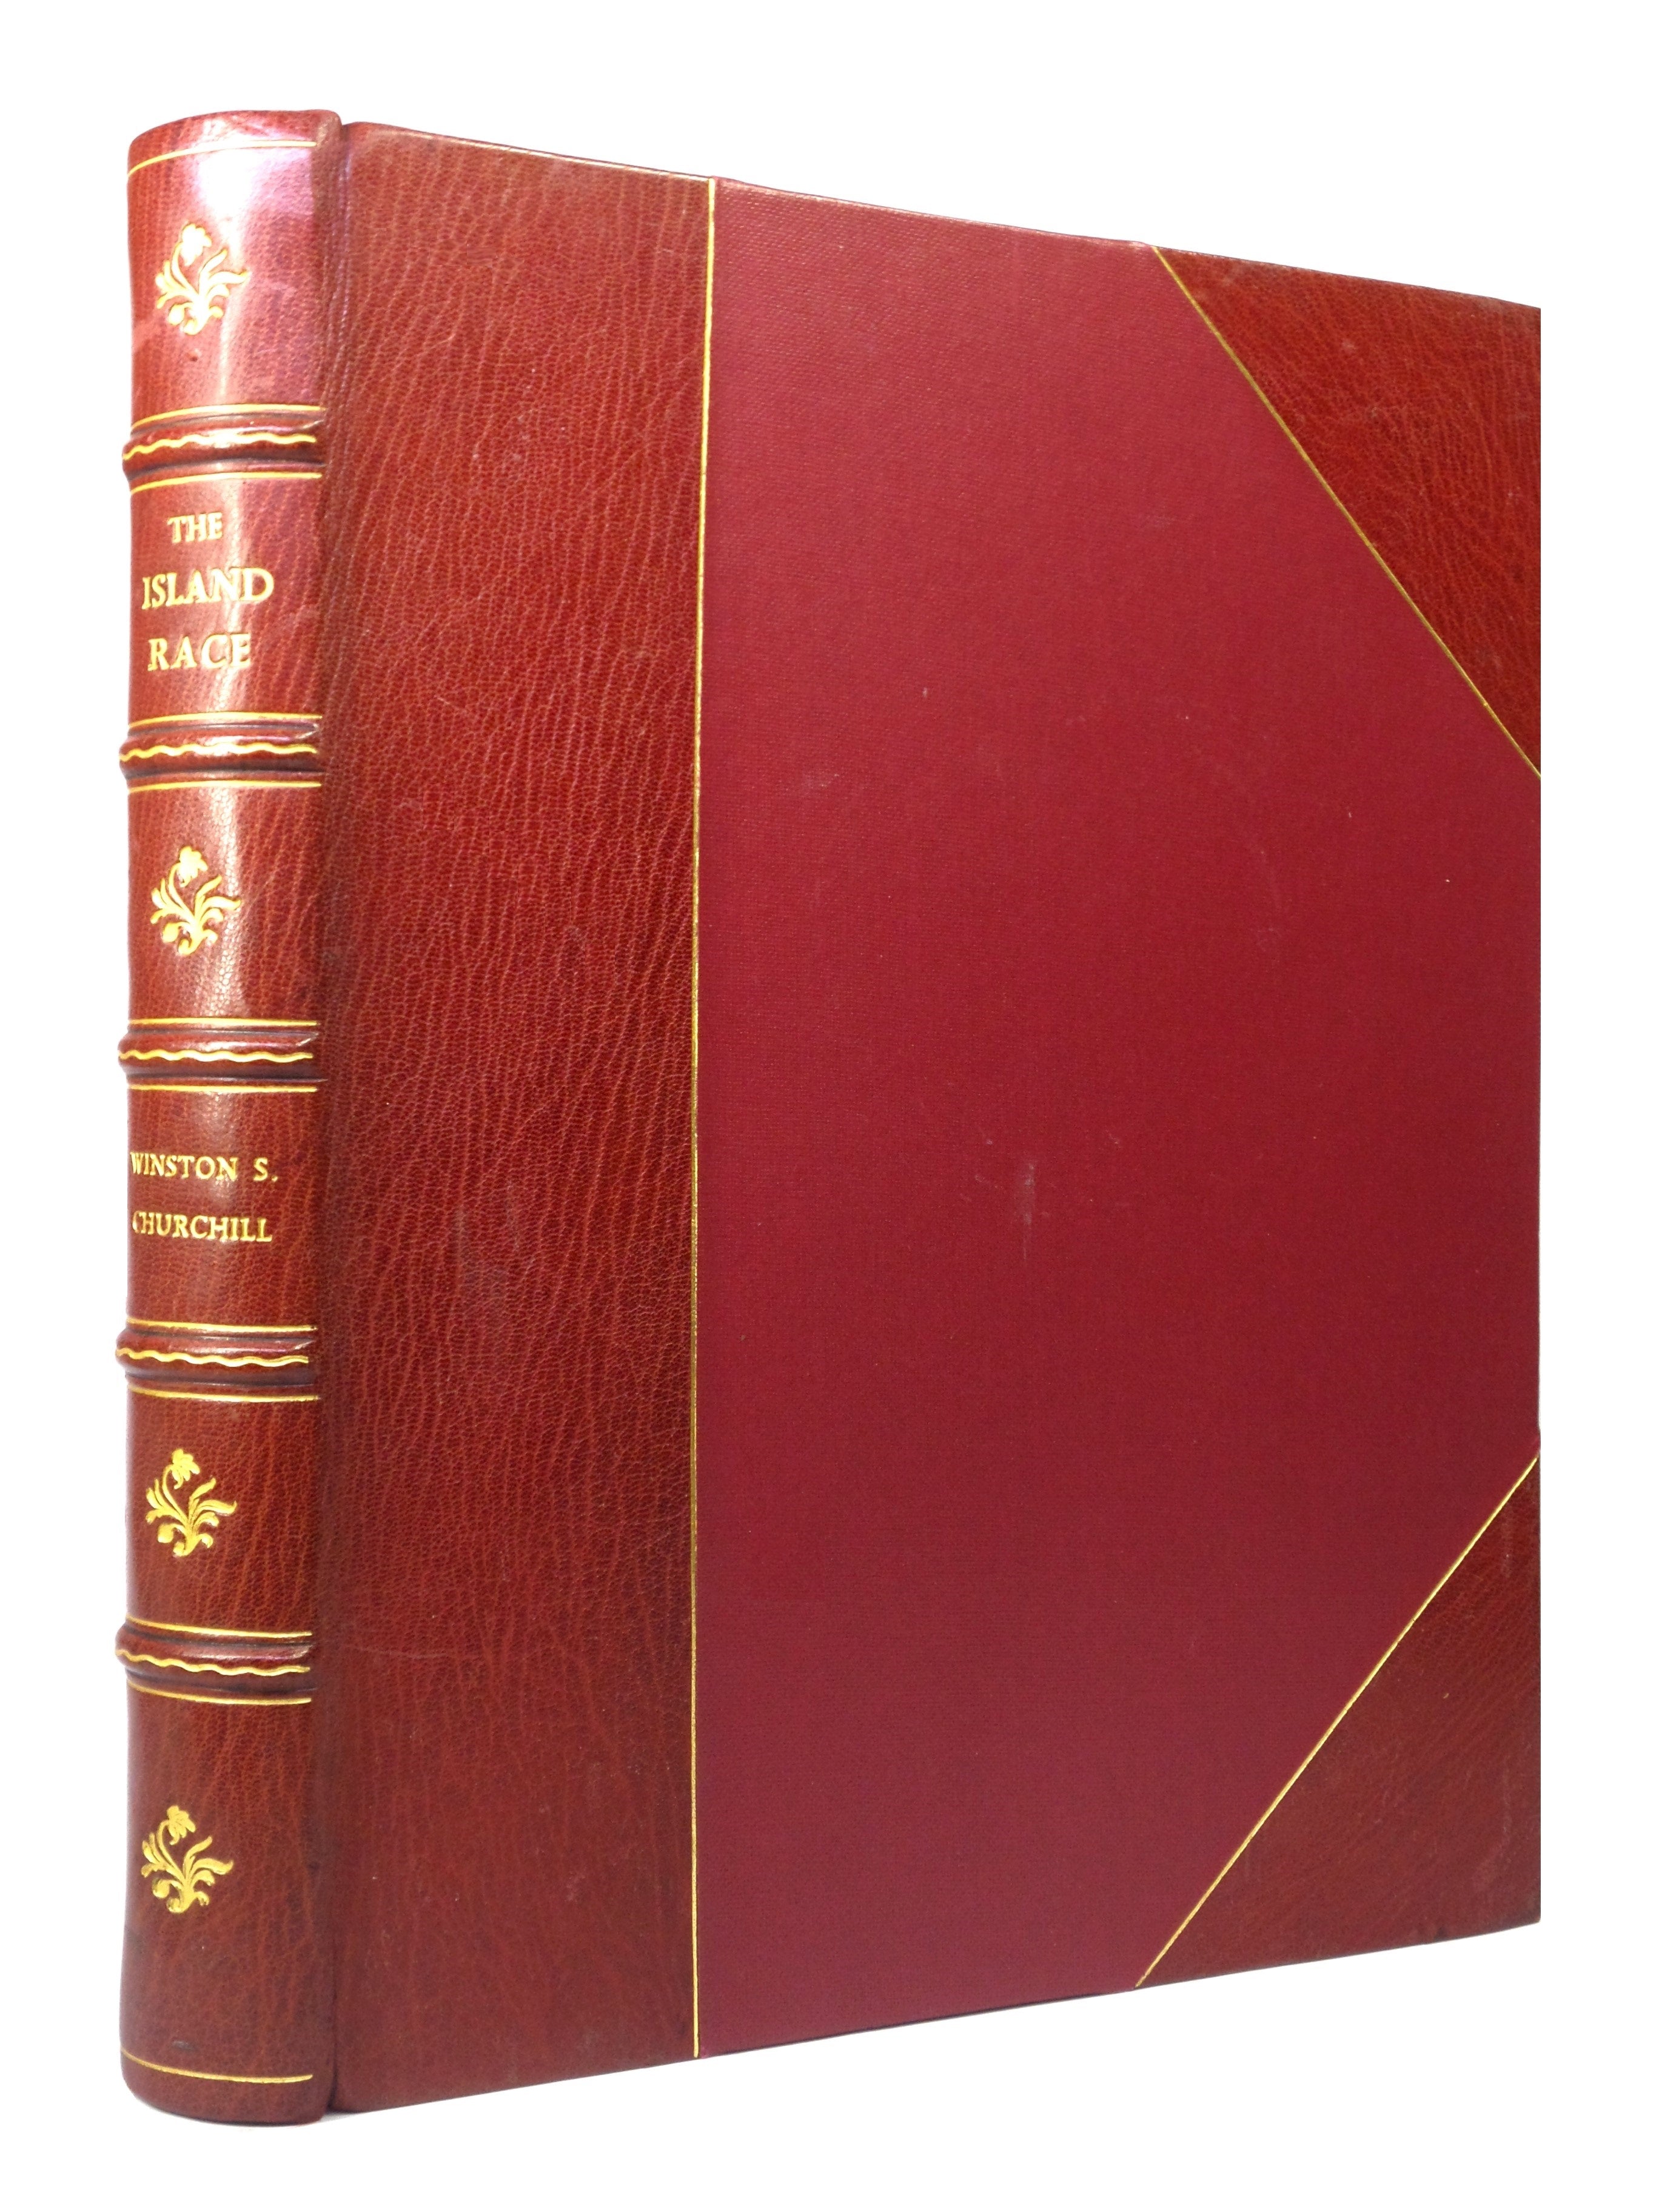 THE ISLAND RACE [THE HISTORY OF THE ENGLISH-SPEAKING PEOPLES, ABRIDGEMENT] BY WINSTON S. CHURCHILL 1964 FIRST EDITION